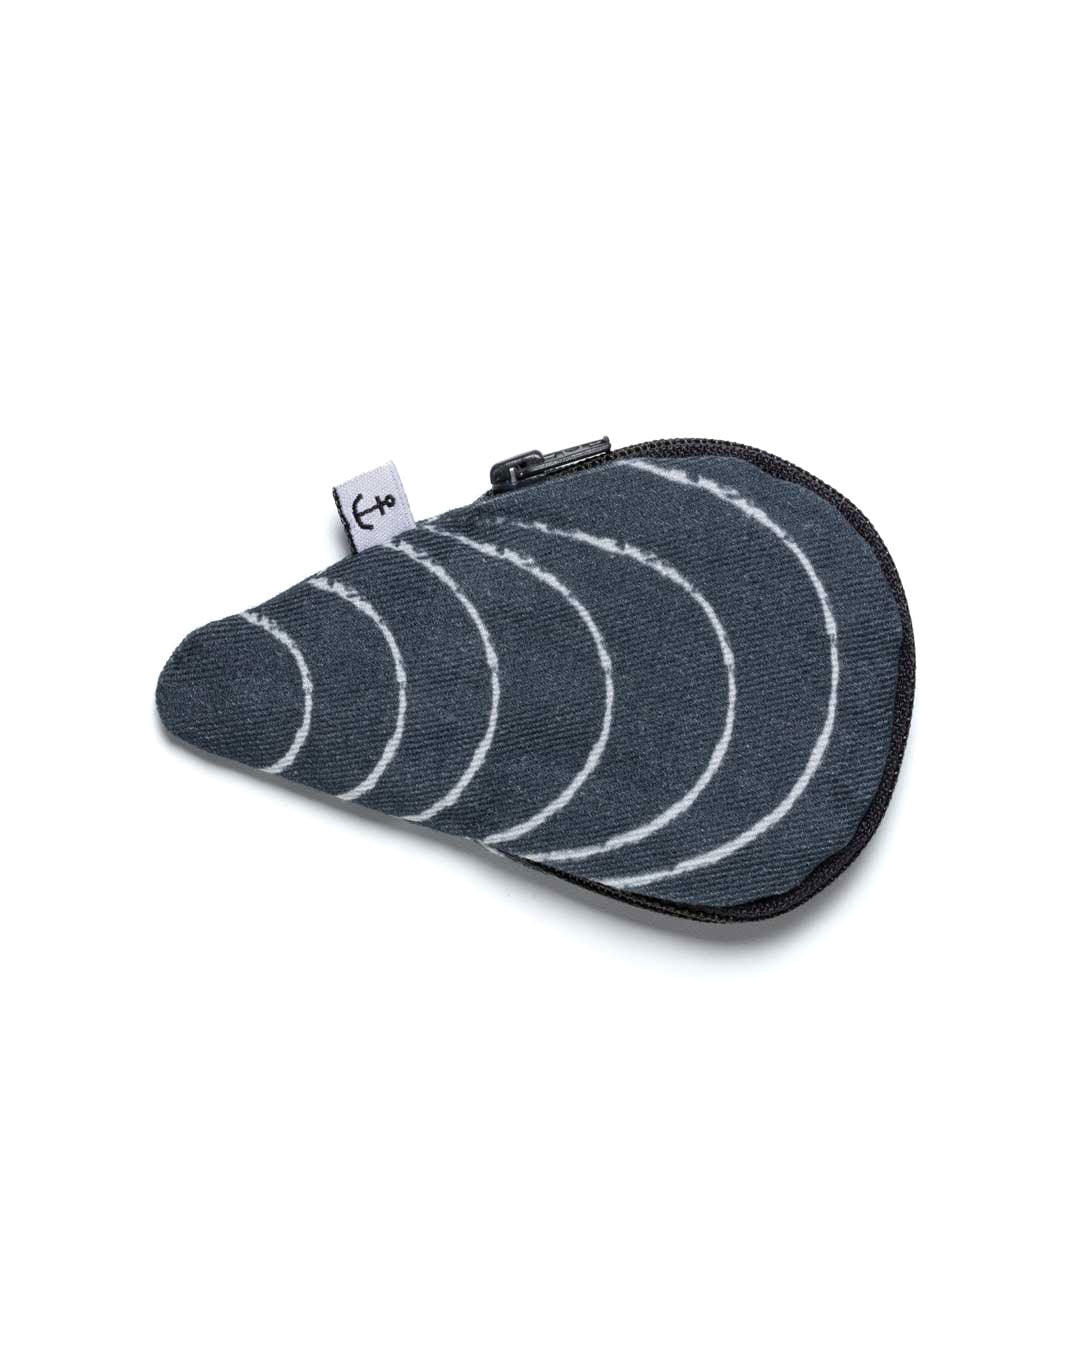 mussel shaped purse